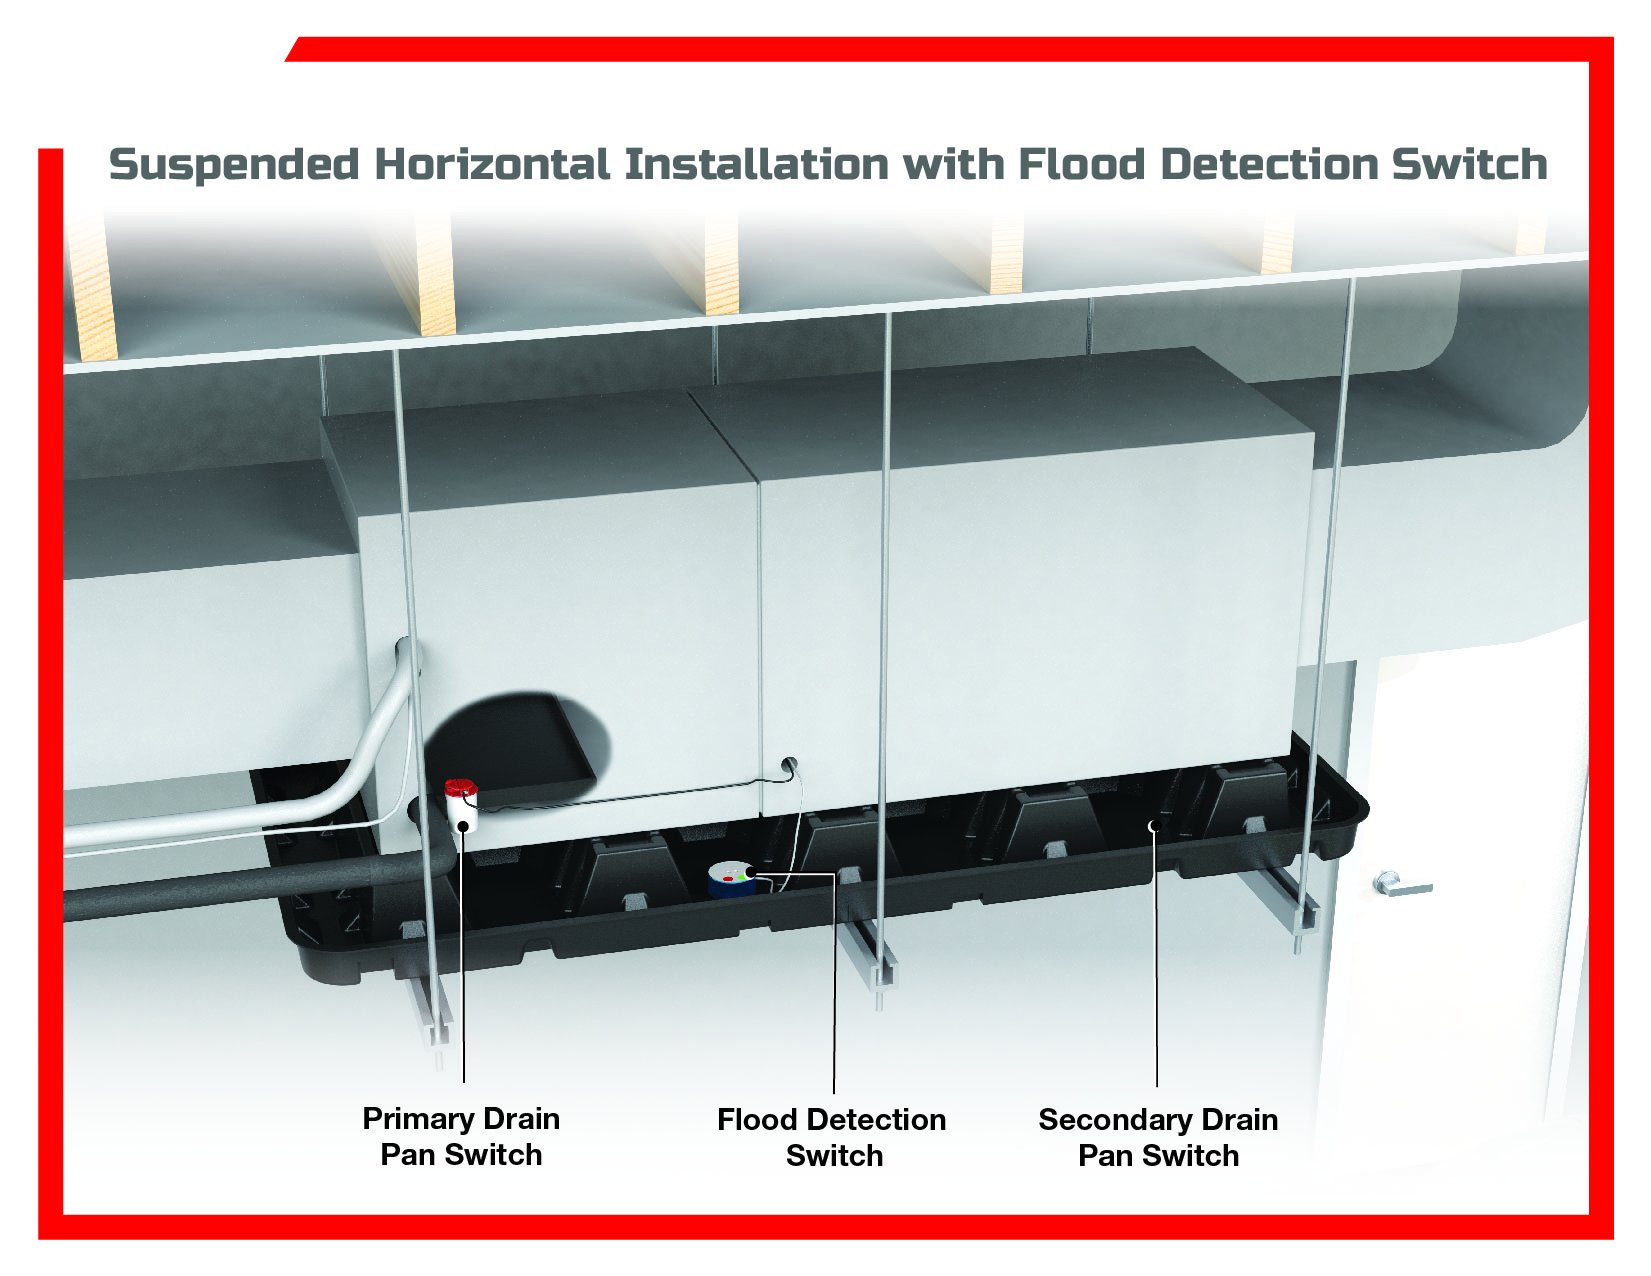 Suspended Horizontal Installation with Flood Detection Switch